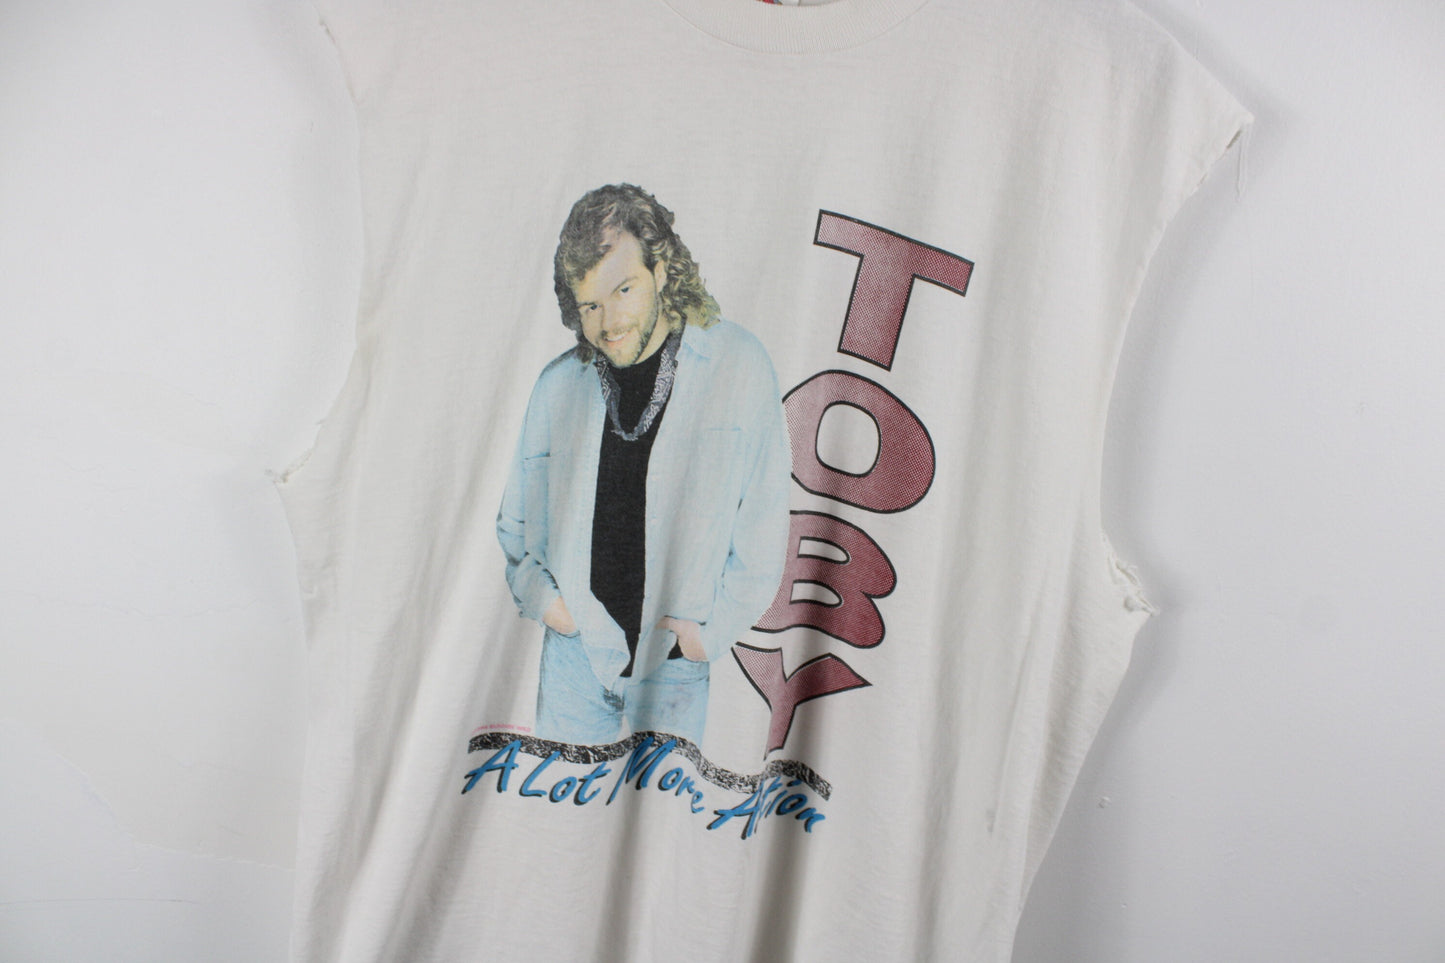 Toby-Keith T-Shirt / Vintage Band Tour Graphic Tee Shirt / 90s / 2000s / 1994